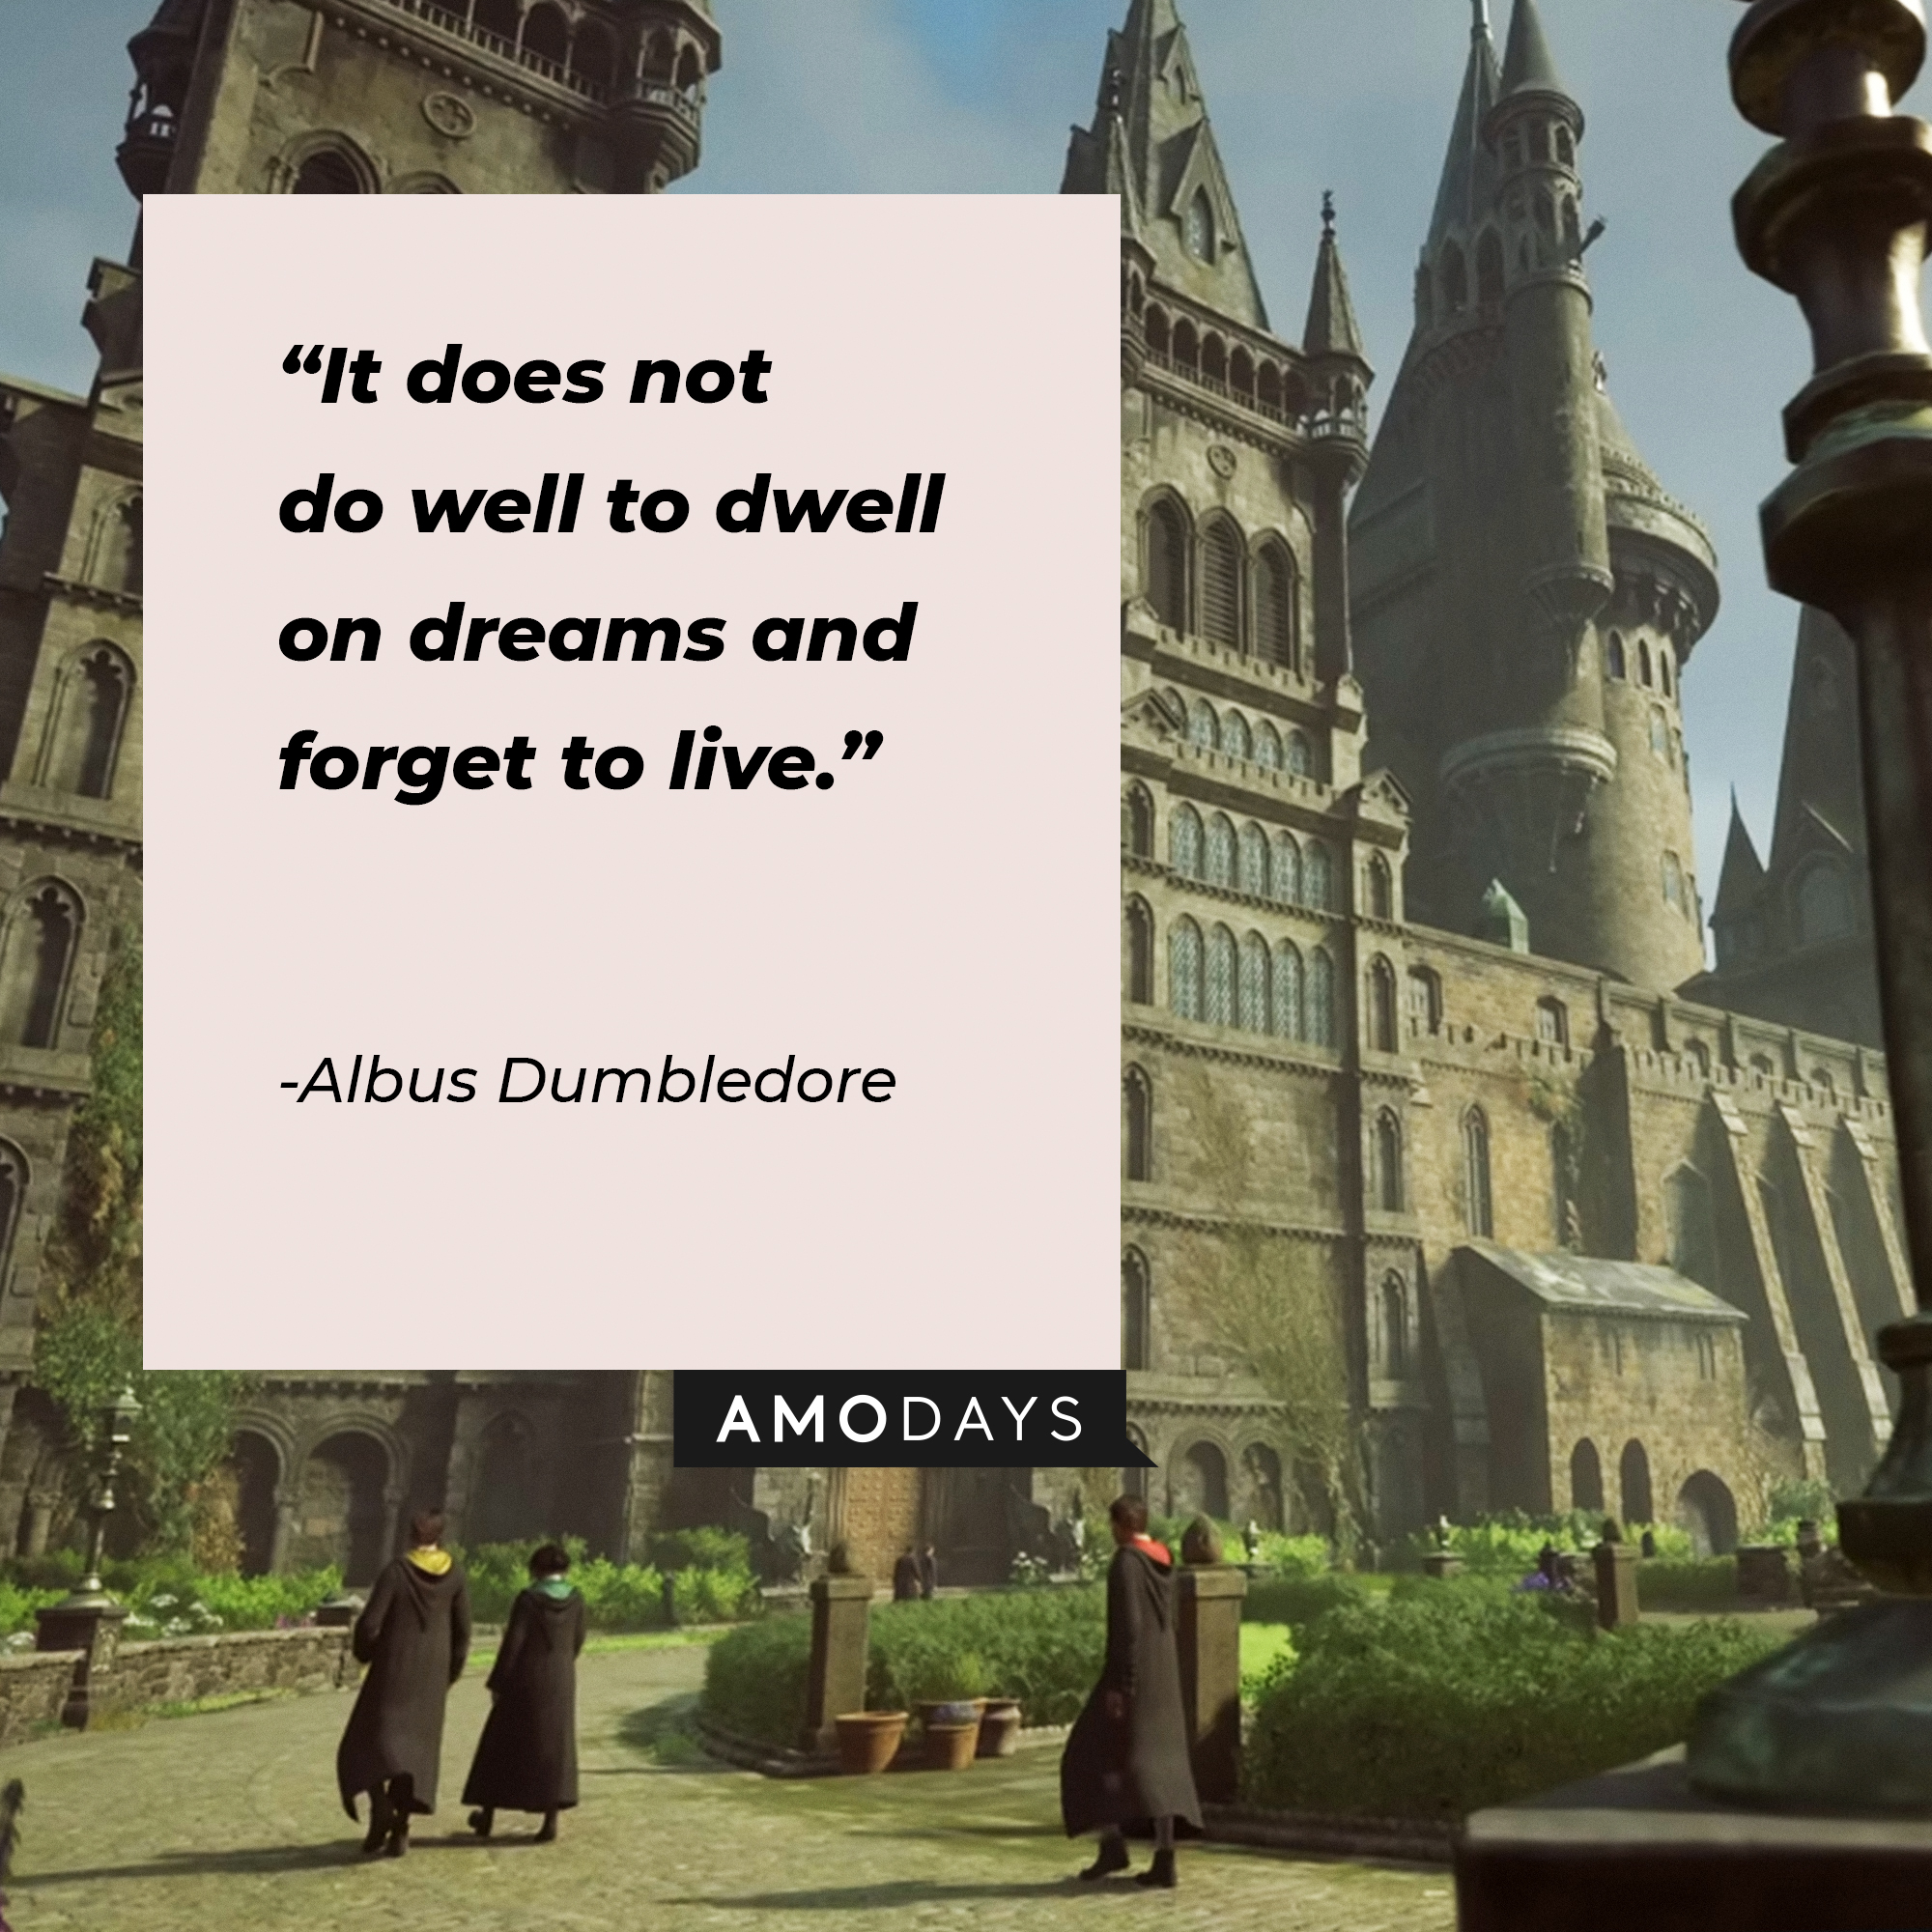 Albus Dumbledore's quote: "It does not do well to dwell on dreams and forget to live." | Source: Youtube.com/HogwartsLegacy